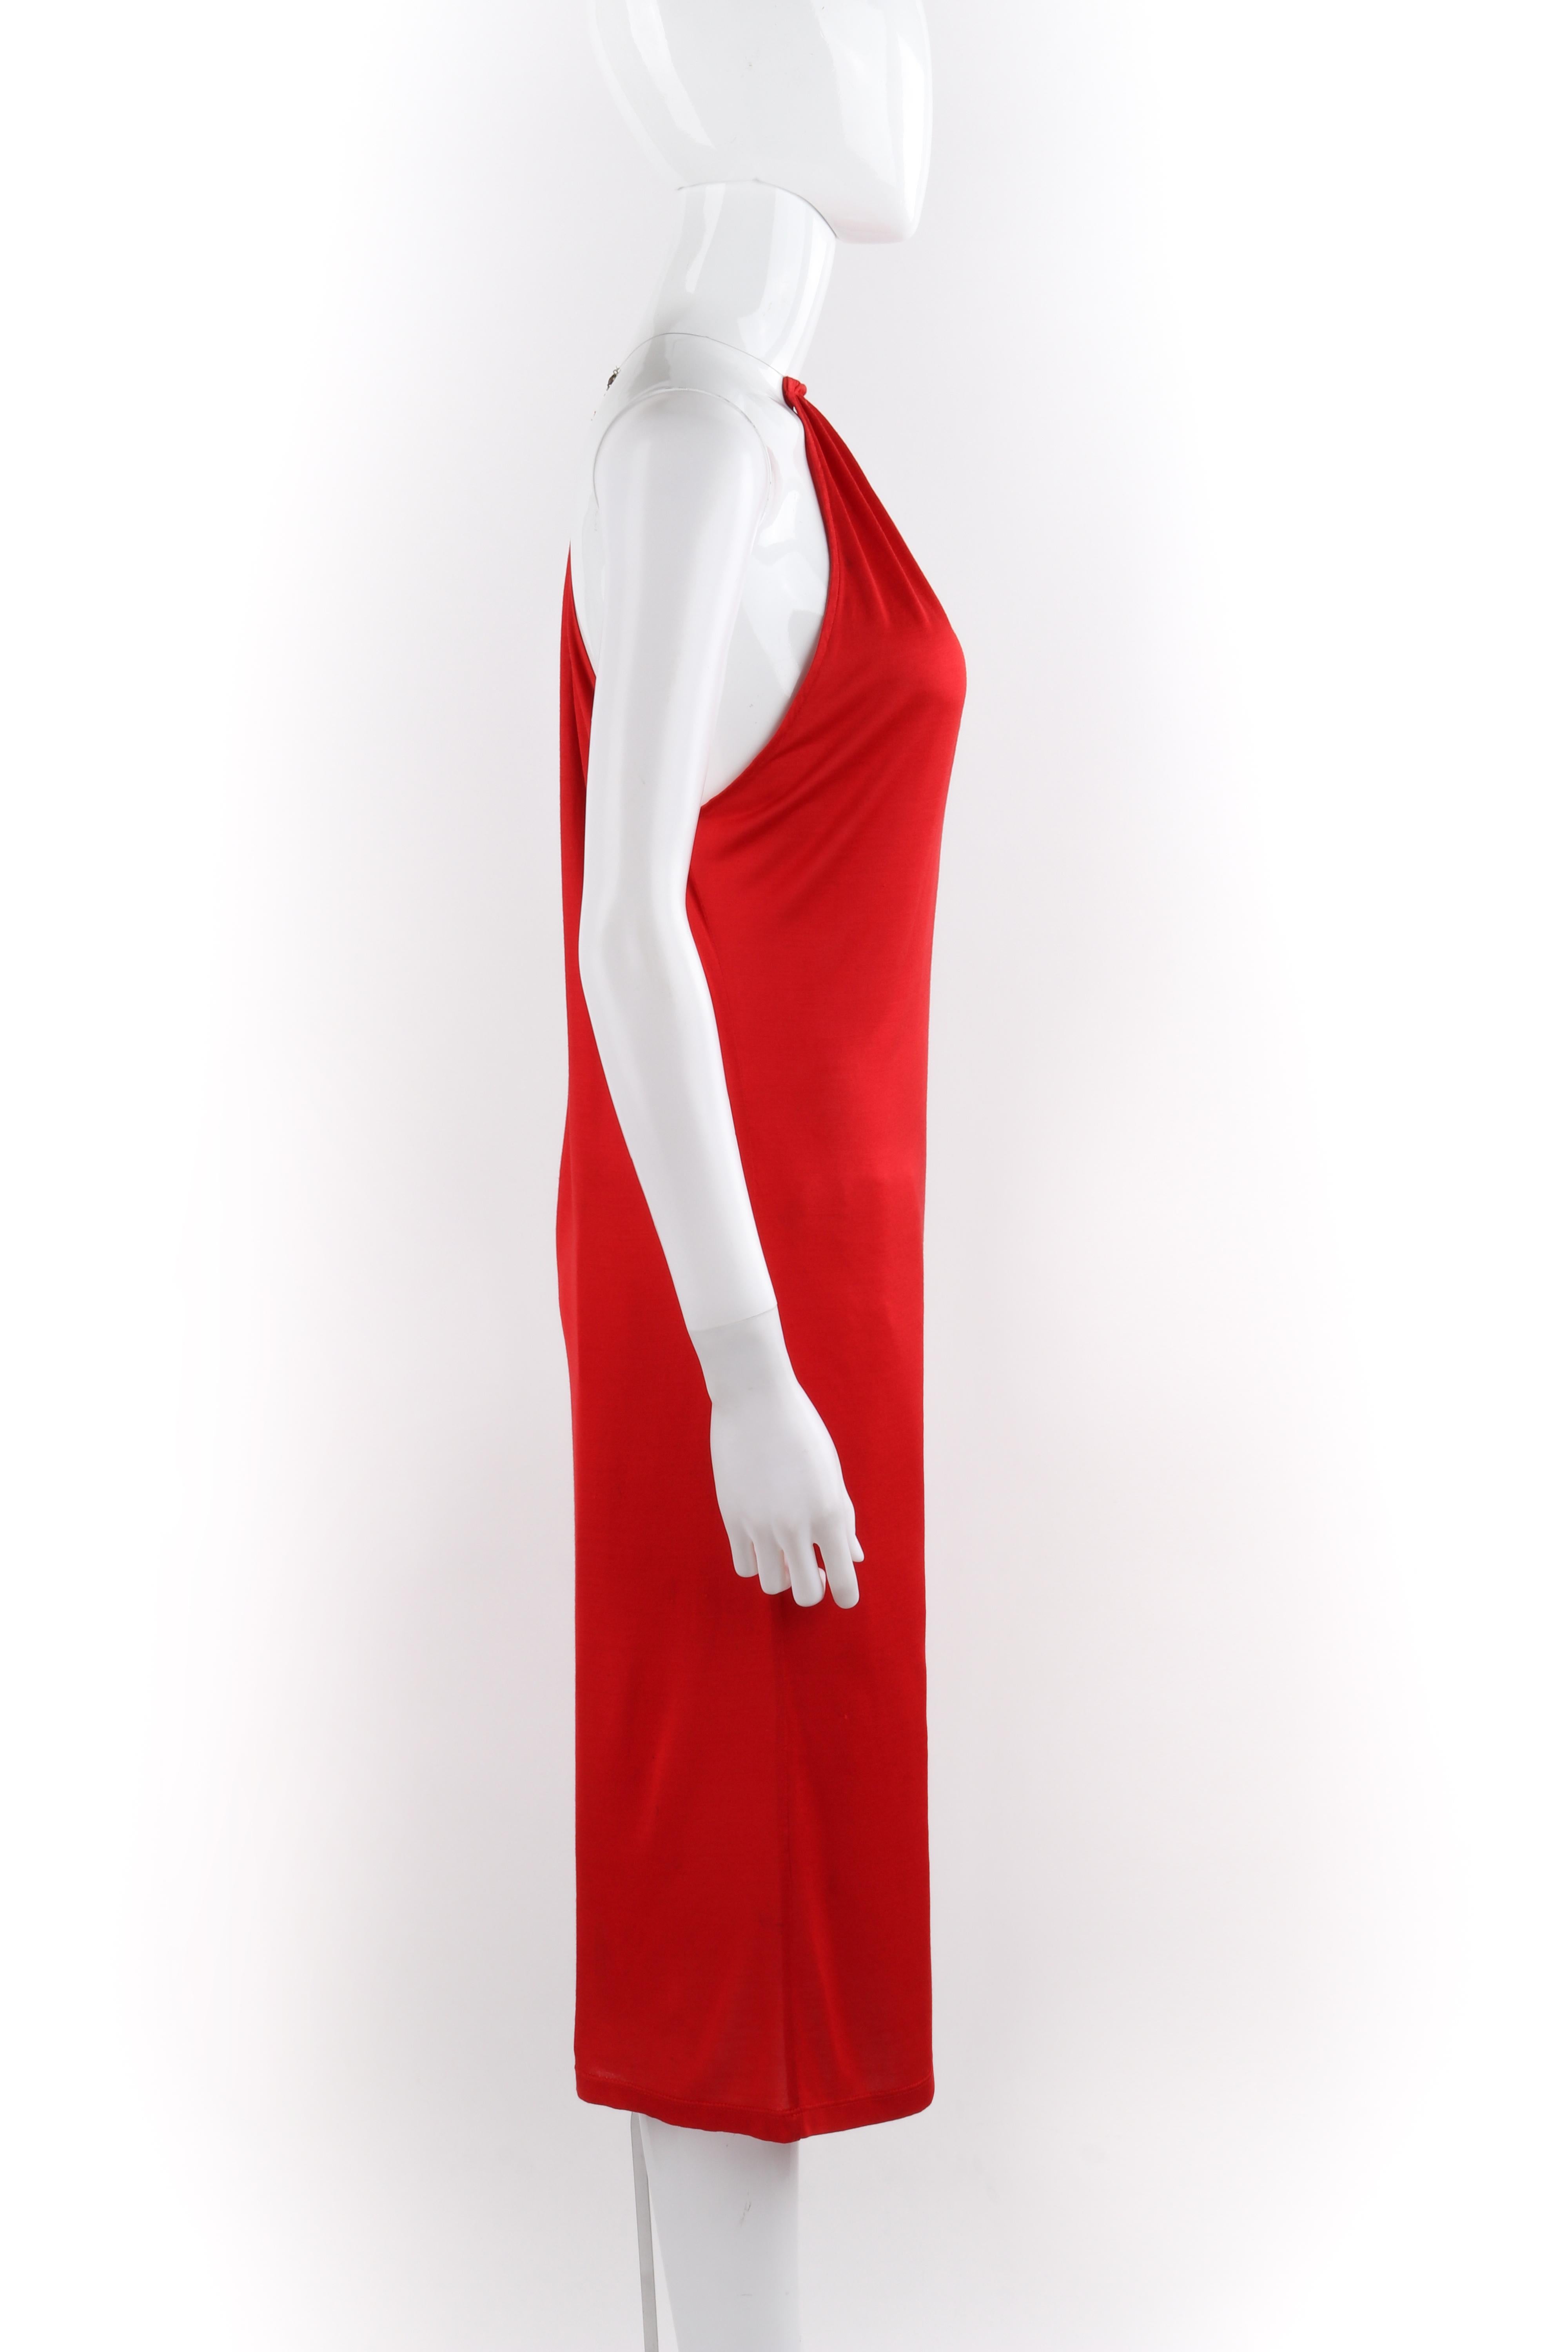 ALEXANDER McQUEEN S/S 2001 “Eye” Red Keyhole Cutout Wire Choker Halter Top Dress In Good Condition For Sale In Thiensville, WI